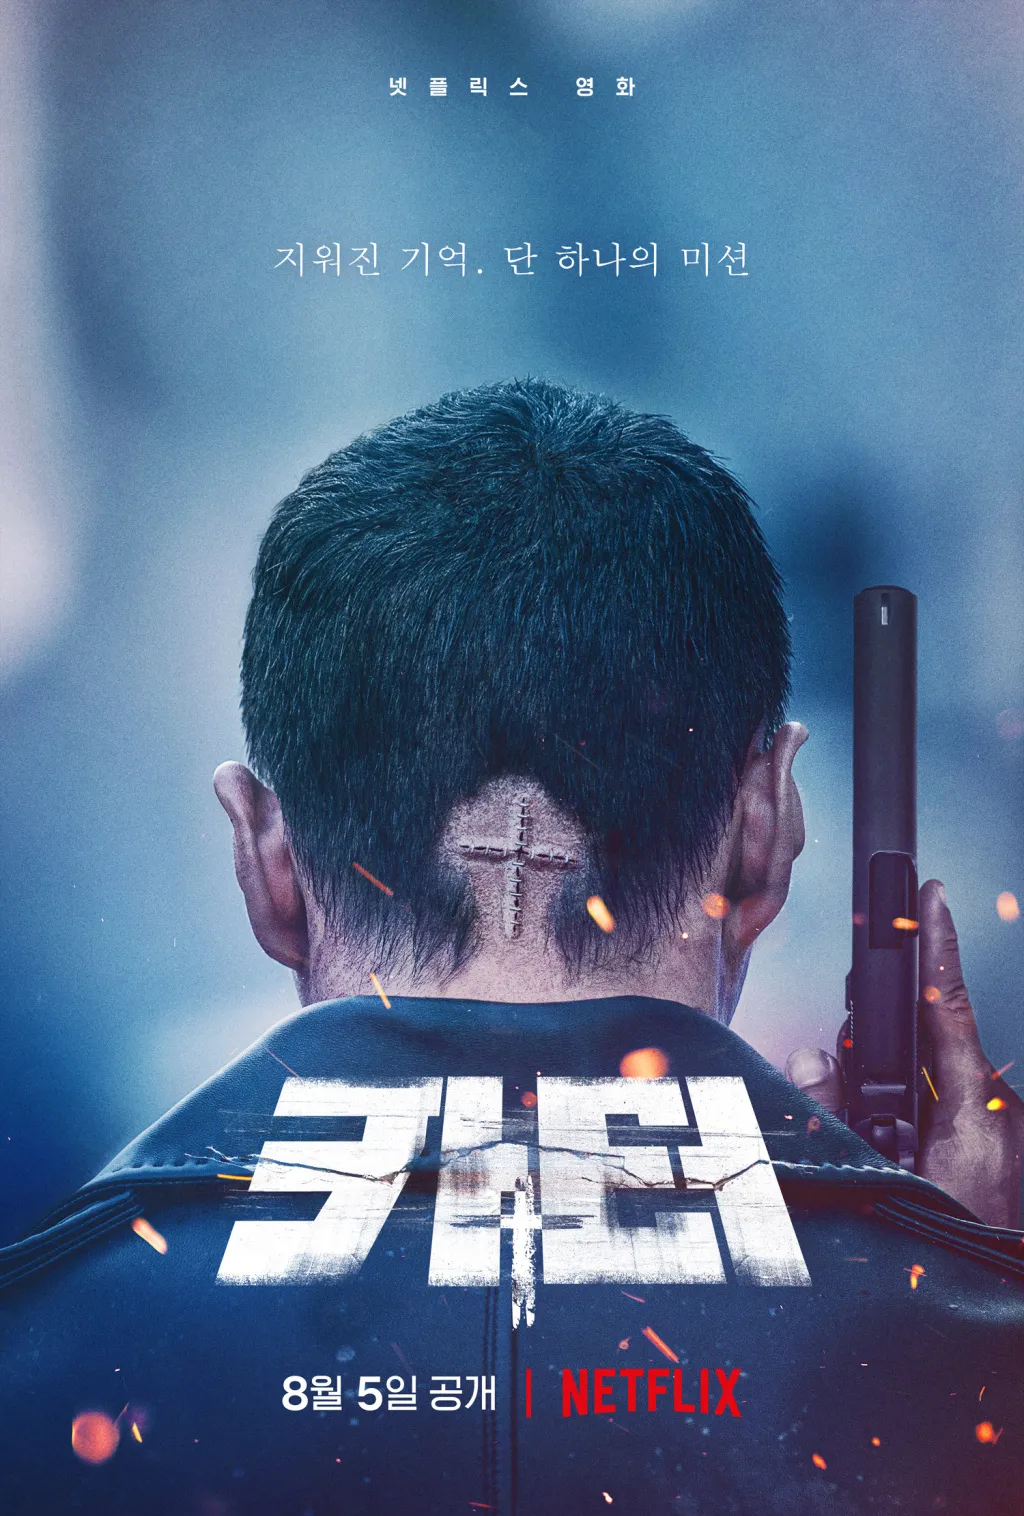 Trailer and poster for action movie "Carter" starring Won Joo and Lee Sung-Jae, it will be available on Netflix on August 5 | FMV6